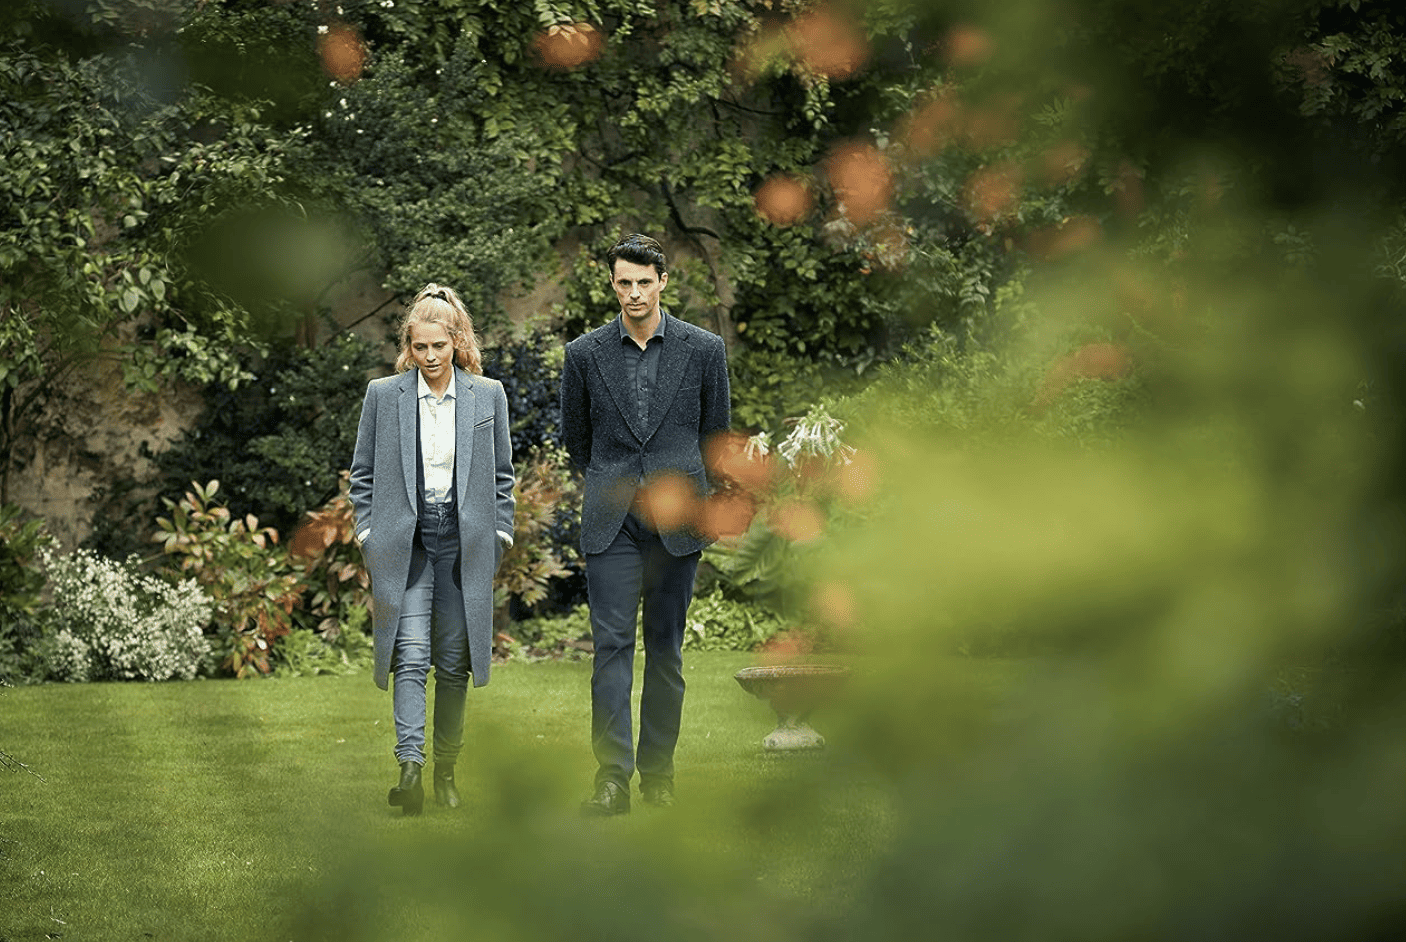 A woman and man walk through a garden in this image from Bad Wolf.